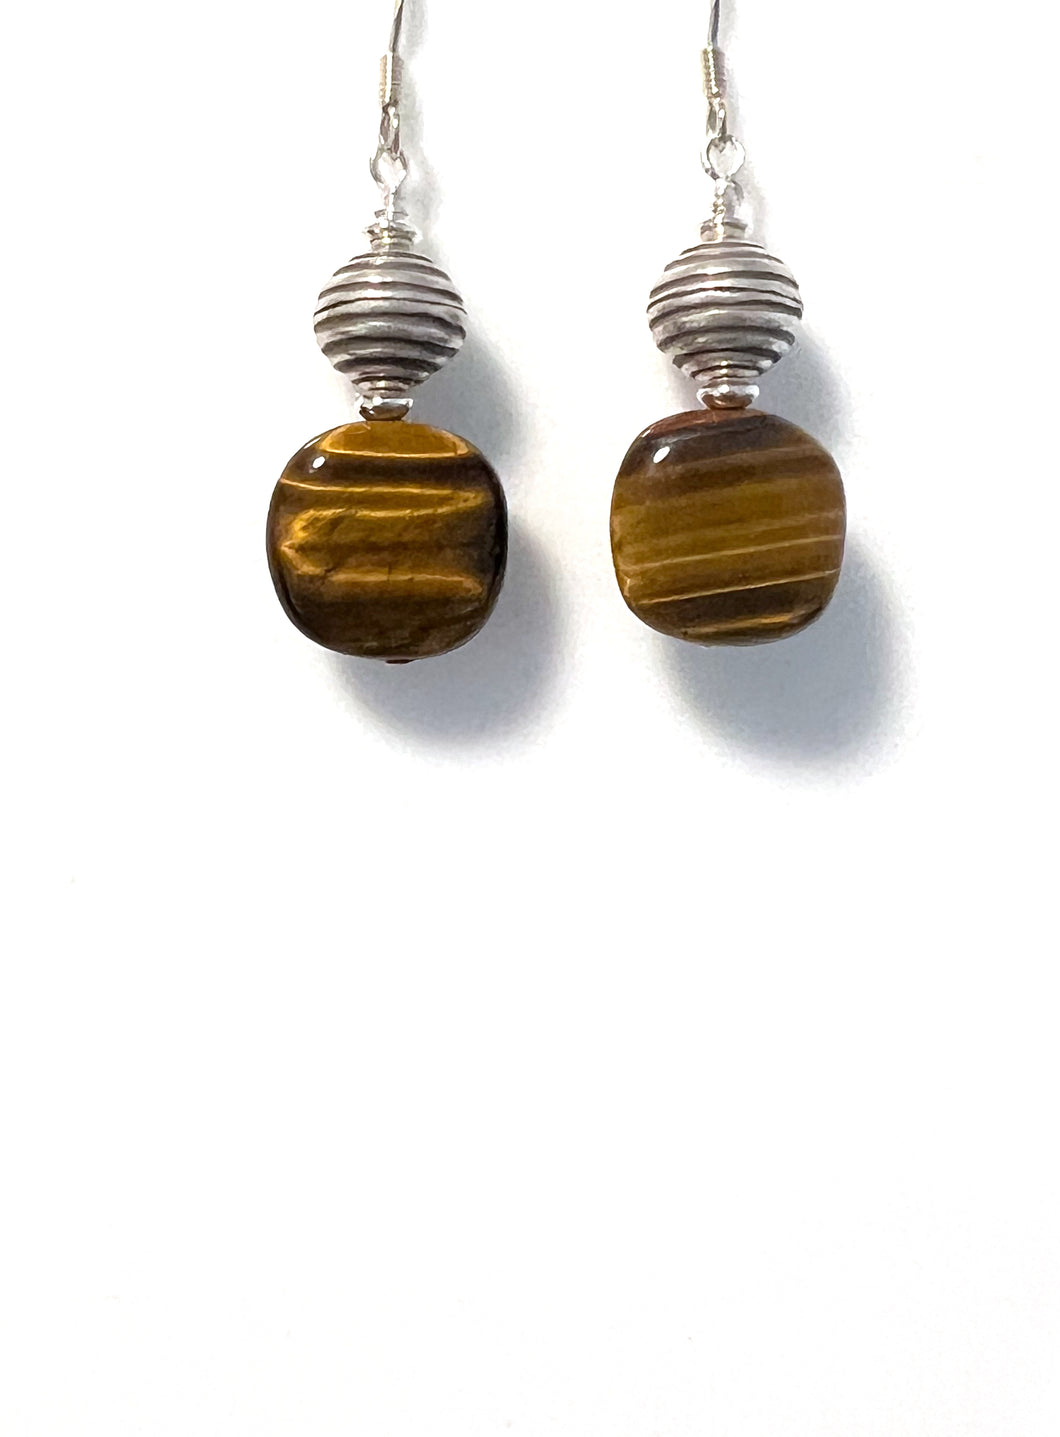 Brown Tigers Eye with decorative Sterling Silver Bead Earrings